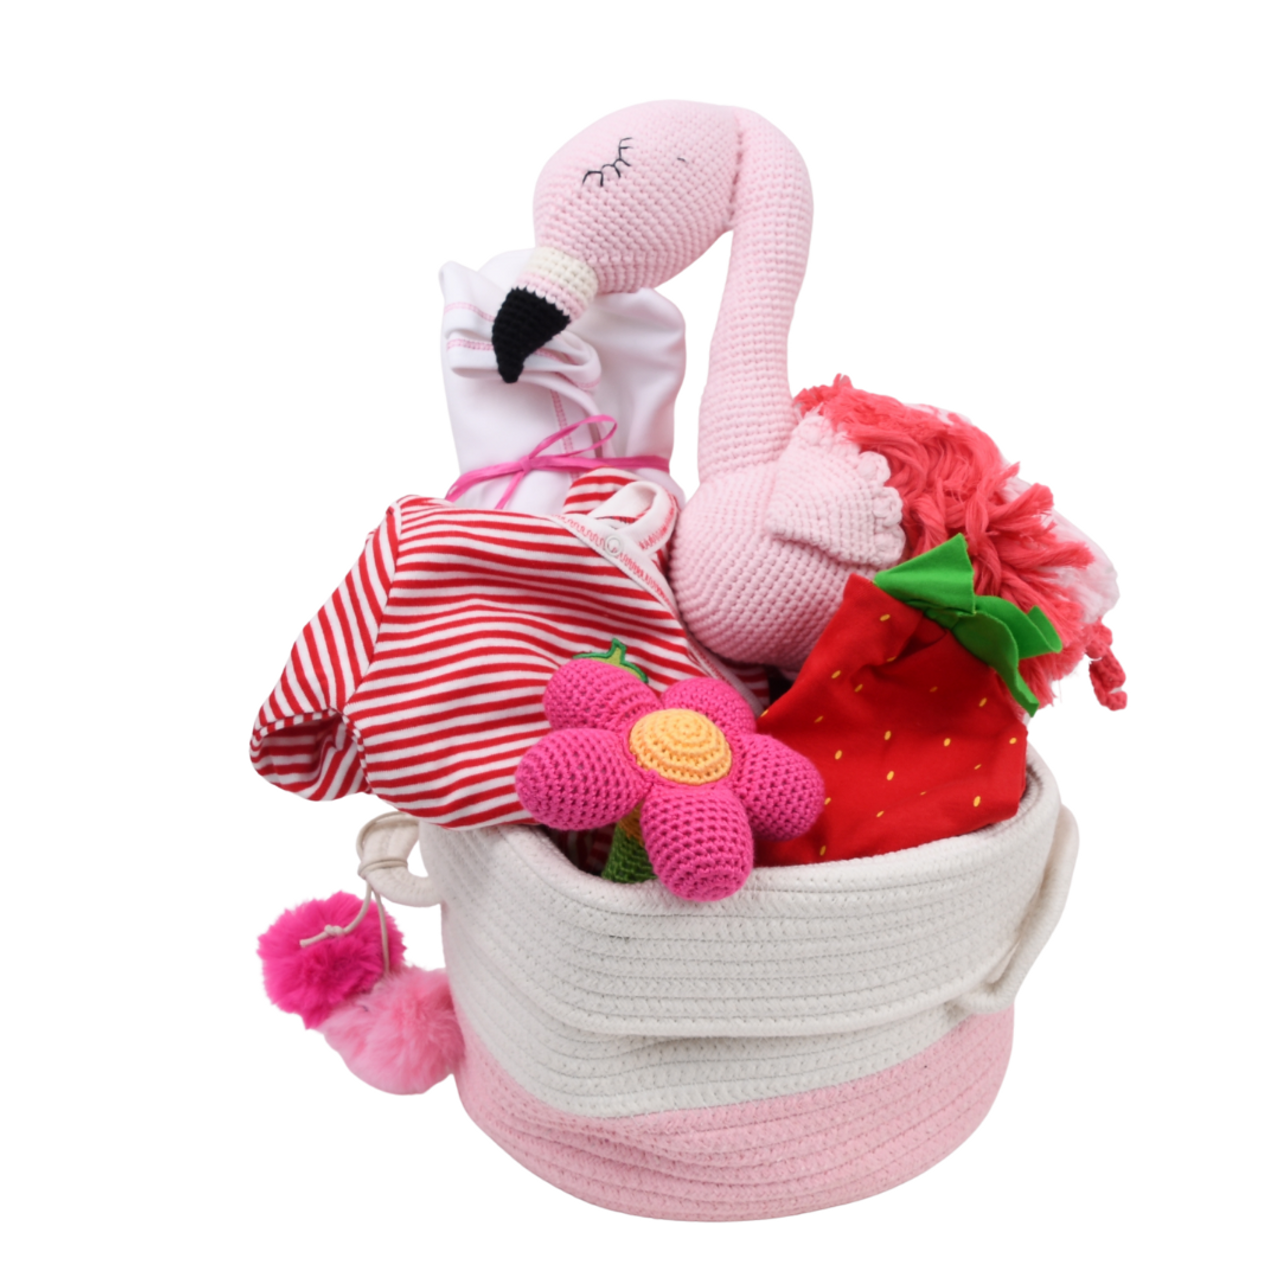 Baby Gift Basket - Berry Cute